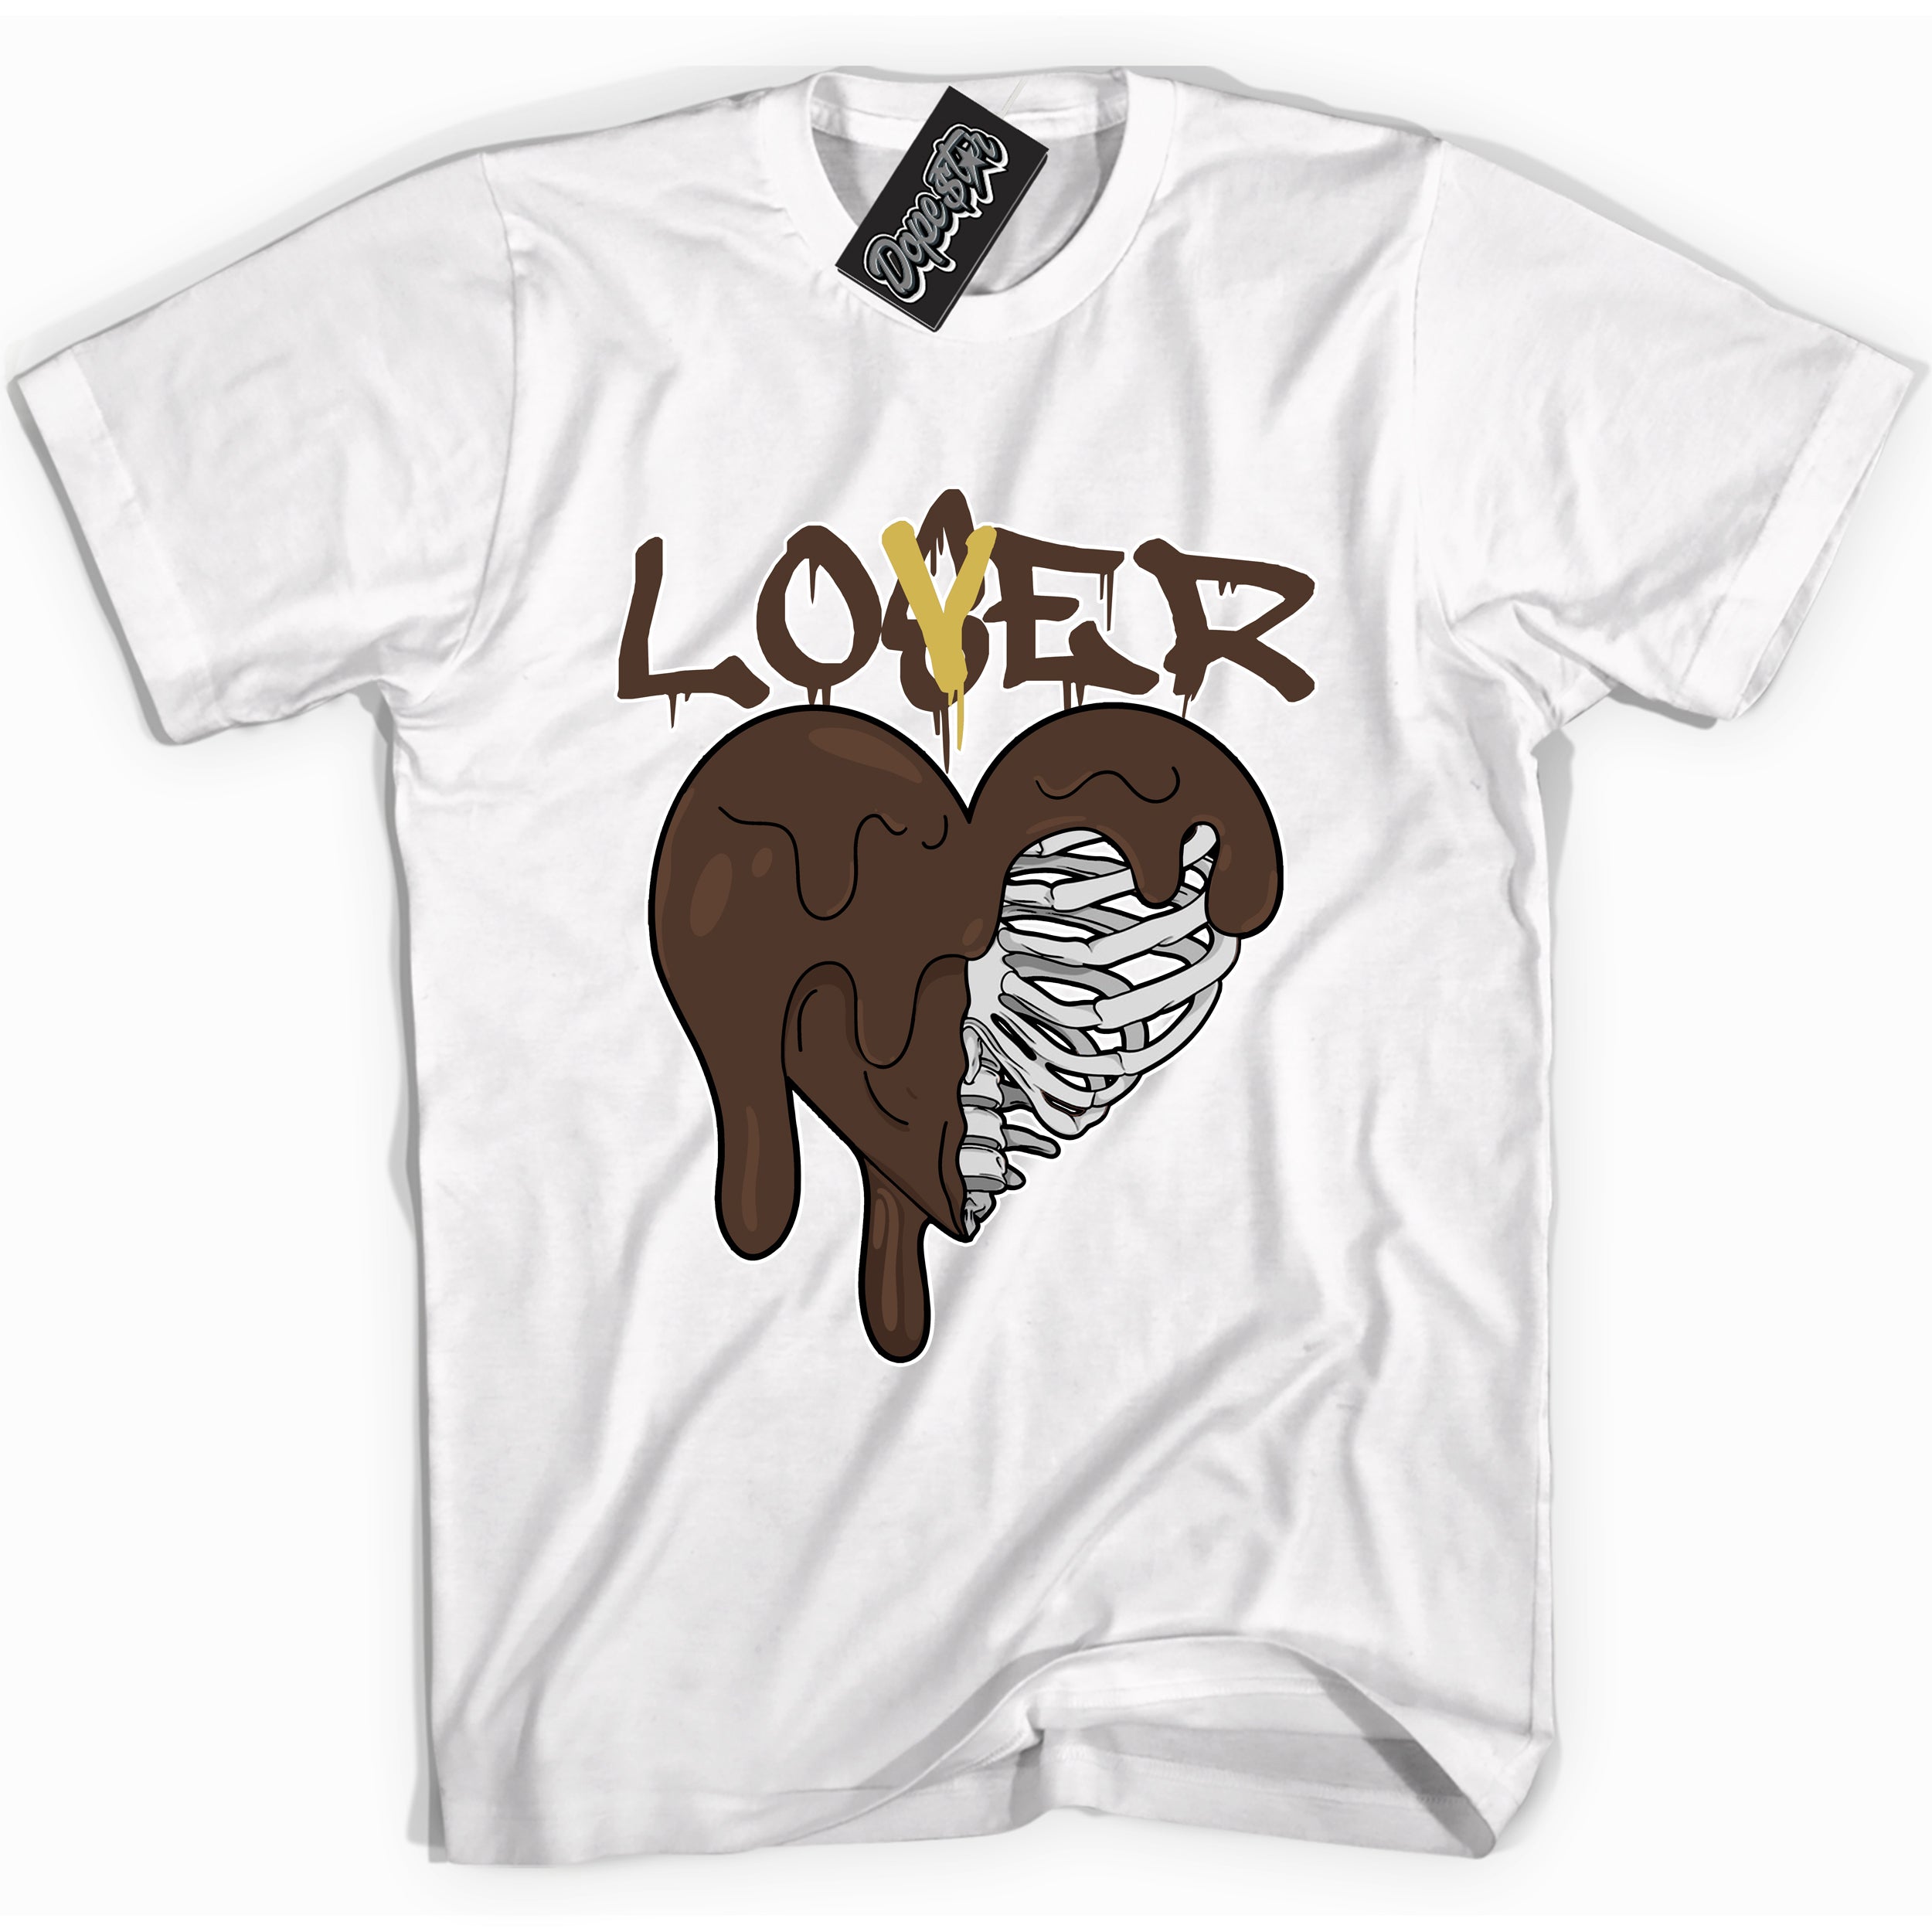 Cool White graphic tee with “ Lover Loser ” design, that perfectly matches Palomino 1s sneakers 